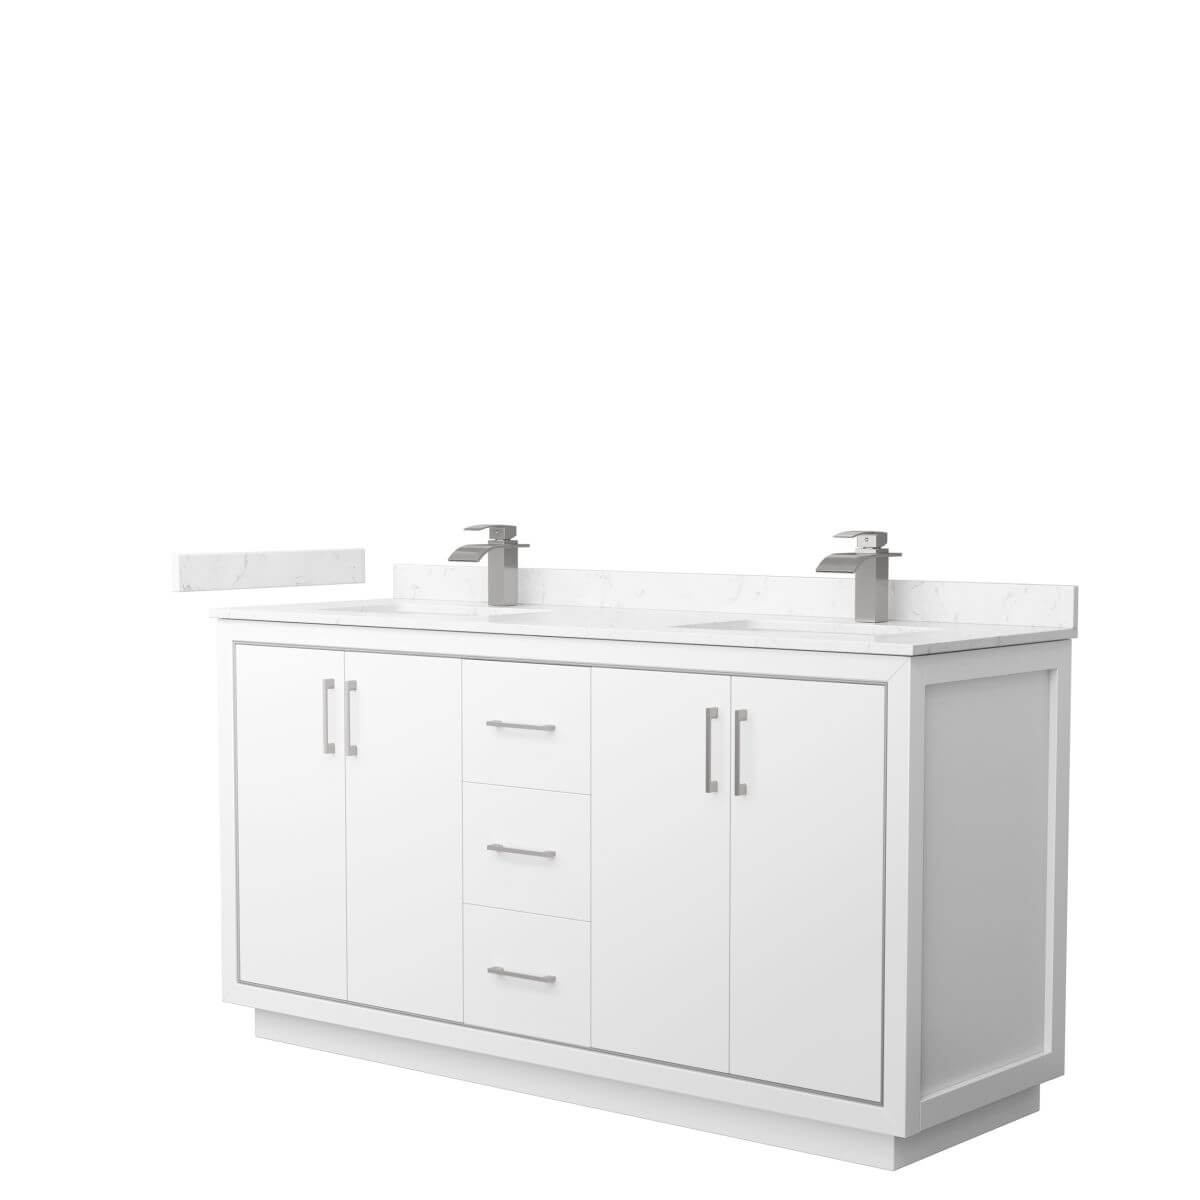 Wyndham Collection WCF111166DWHC2UNSMXX Icon 66 inch Double Bathroom Vanity in White with Carrara Cultured Marble Countertop, Undermount Square Sinks and Brushed Nickel Trim